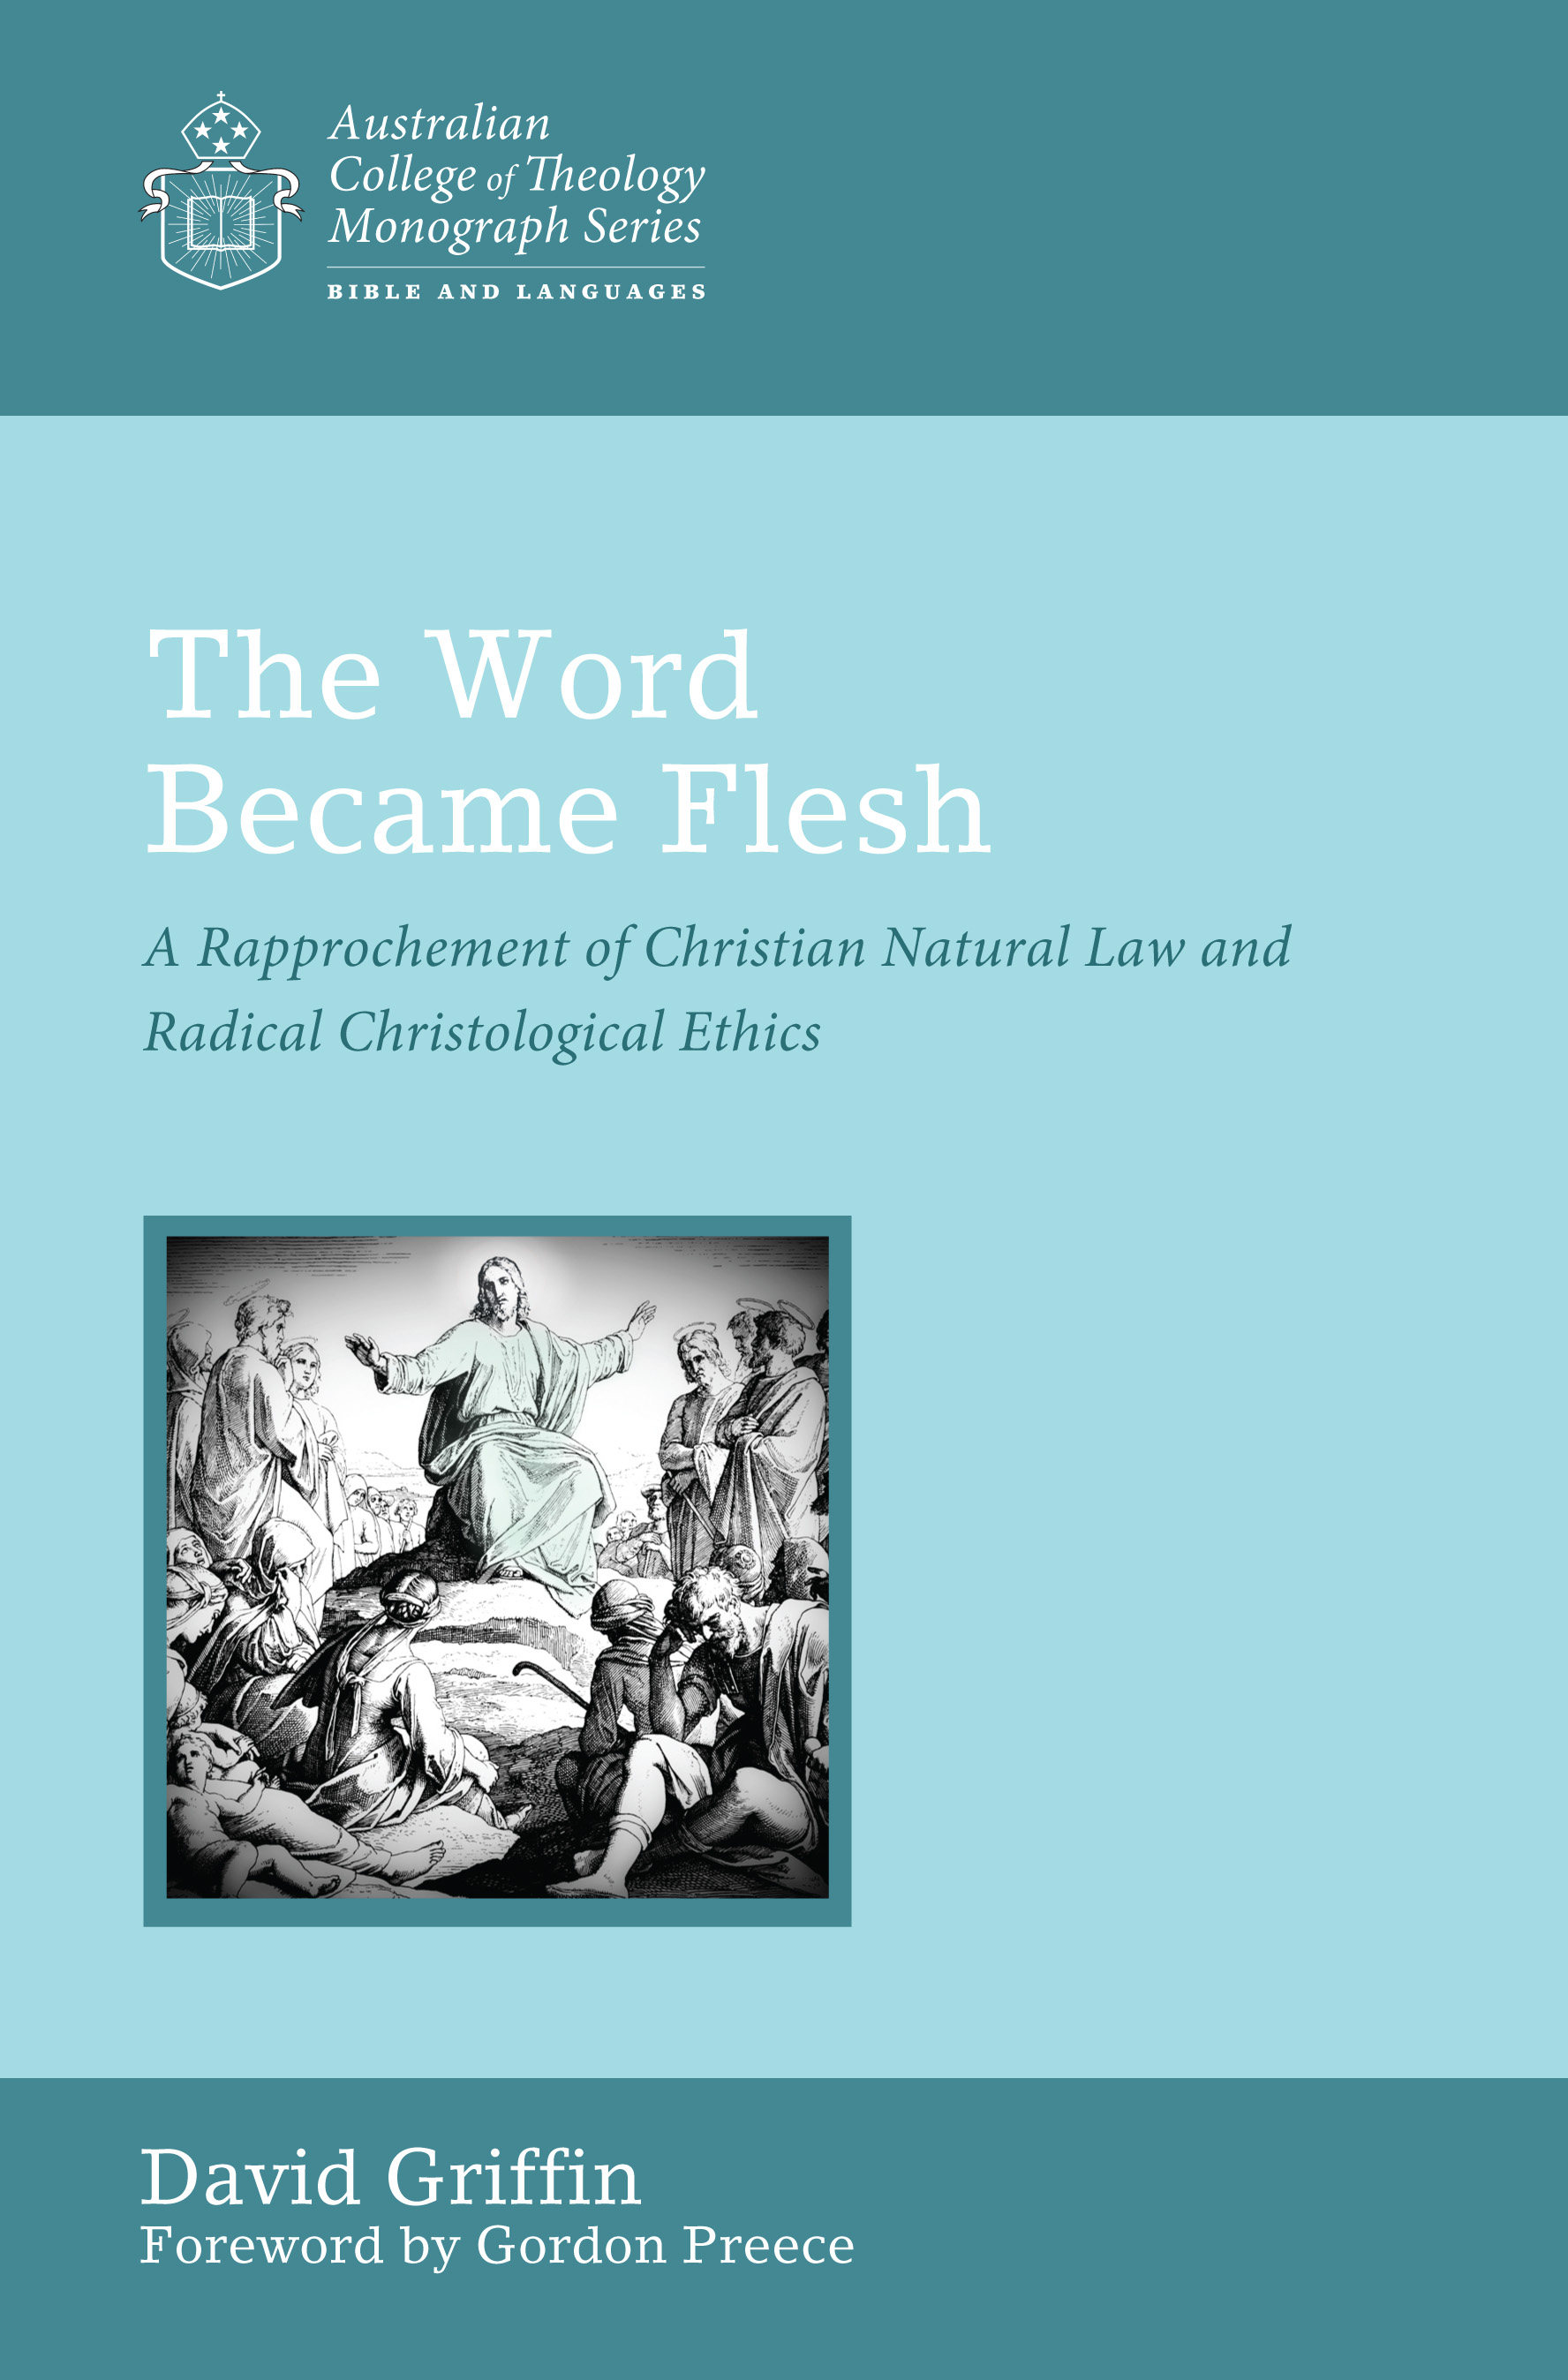 The Word Became Flesh: A Rapprochement of Christian Natural Law and Radical Christological Ethics